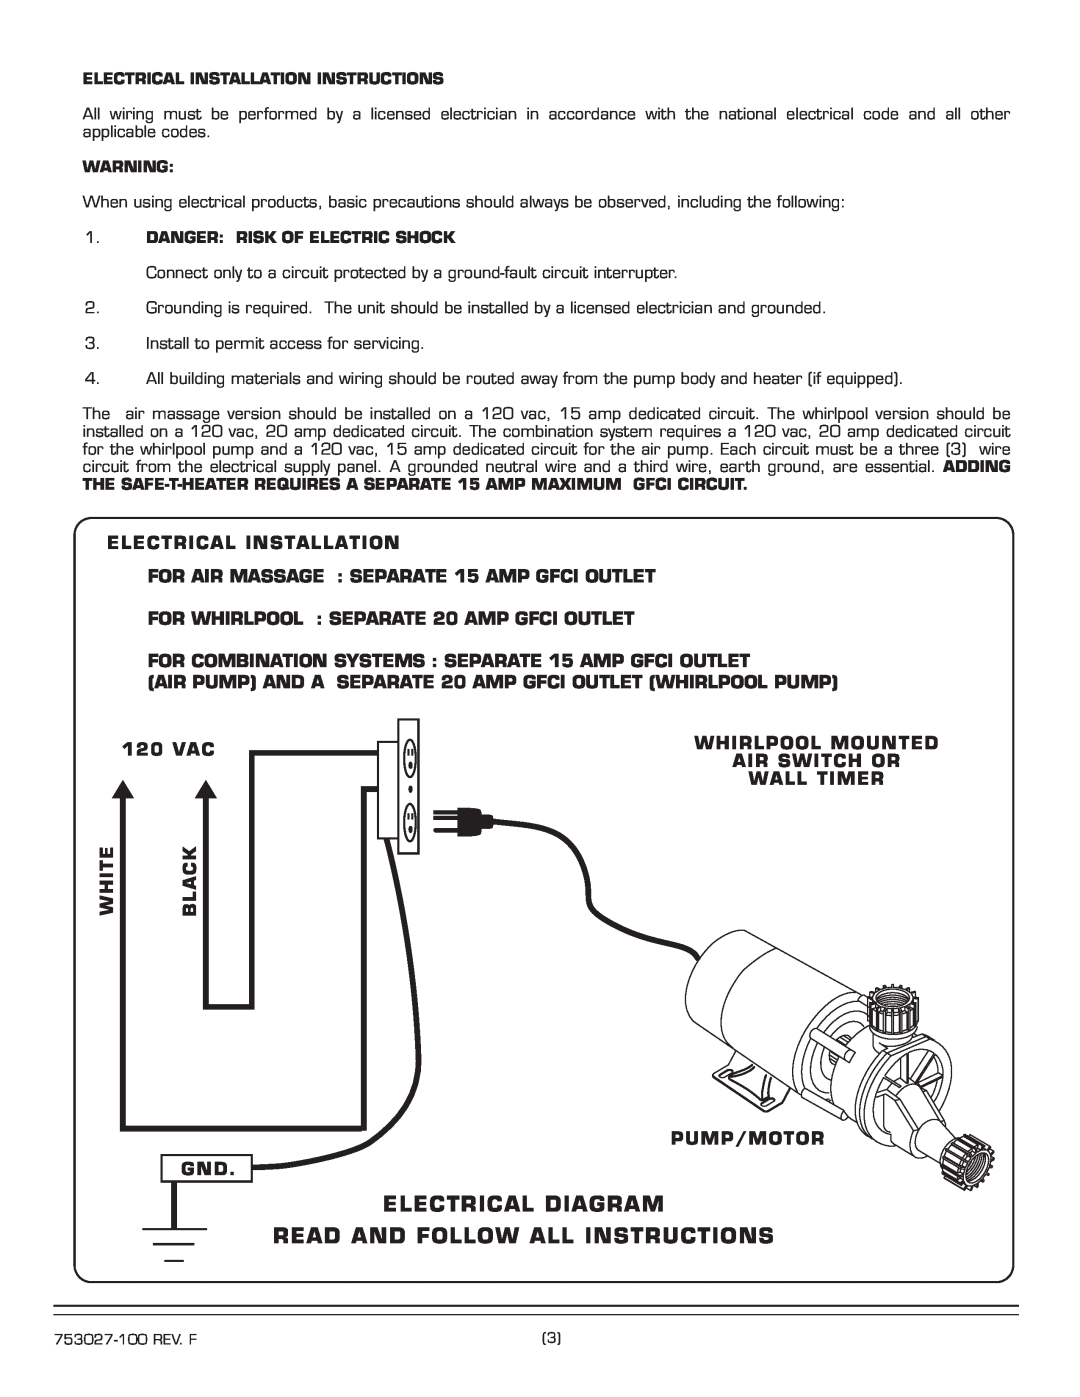 American Standard 2742.XXXX Electrical Diagram Read And Follow All Instructions, FOR WHIRLPOOL SEPARATE 20 AMP GFCI OUTLET 